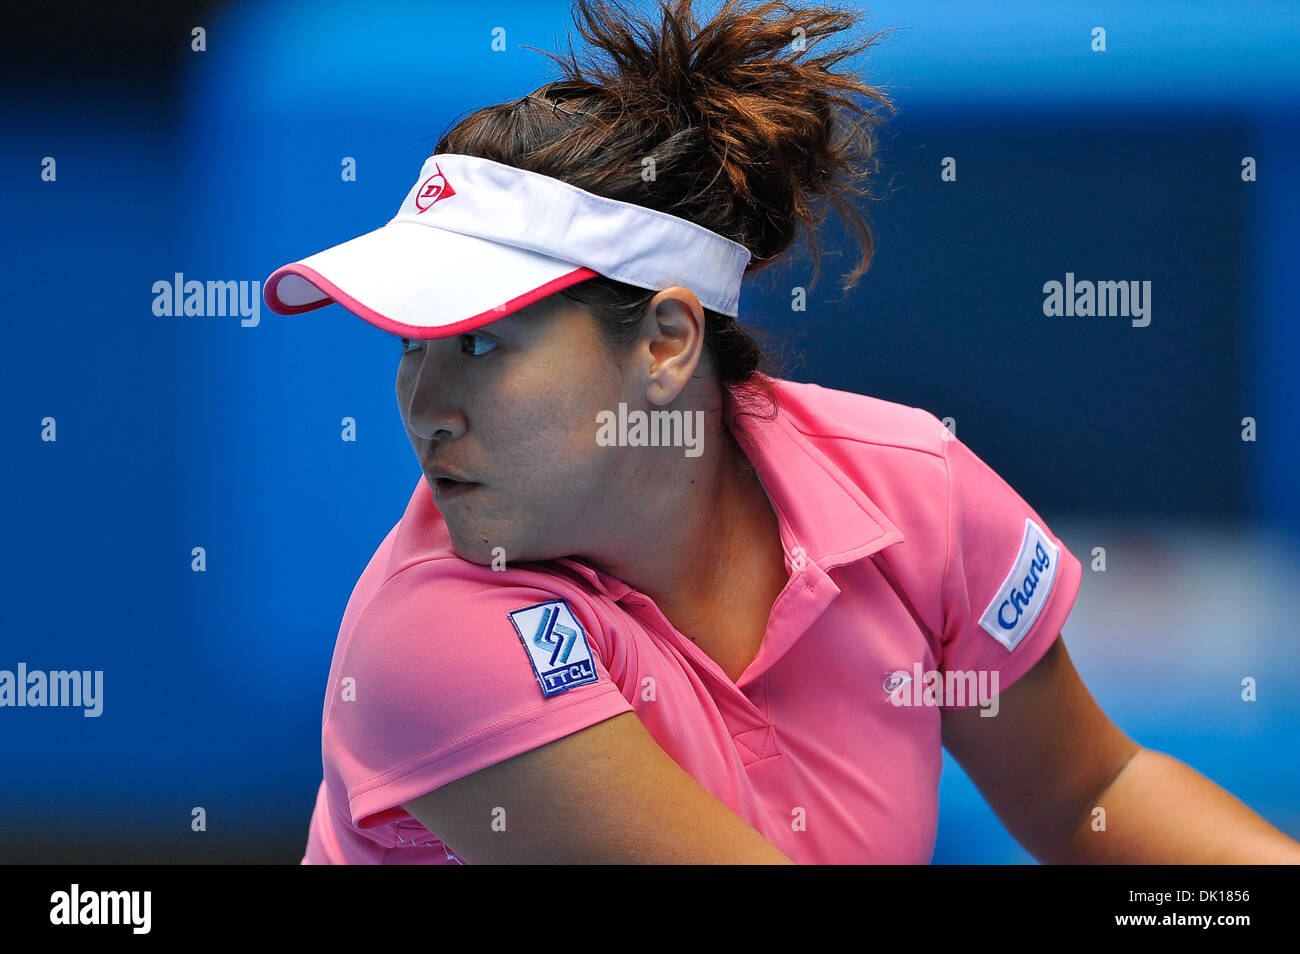 Jan. 17, 2011 - Melbourne, Victoria, Australia - Tamarine Tanasugarn (THA) in action during her first round match against Maria Sharapova (RUS) on day one of the 2011 Australian Open at Melbourne Park, Australia. (Credit Image: © Sydney Low/Southcreek Global/ZUMAPRESS.com) Stock Photo